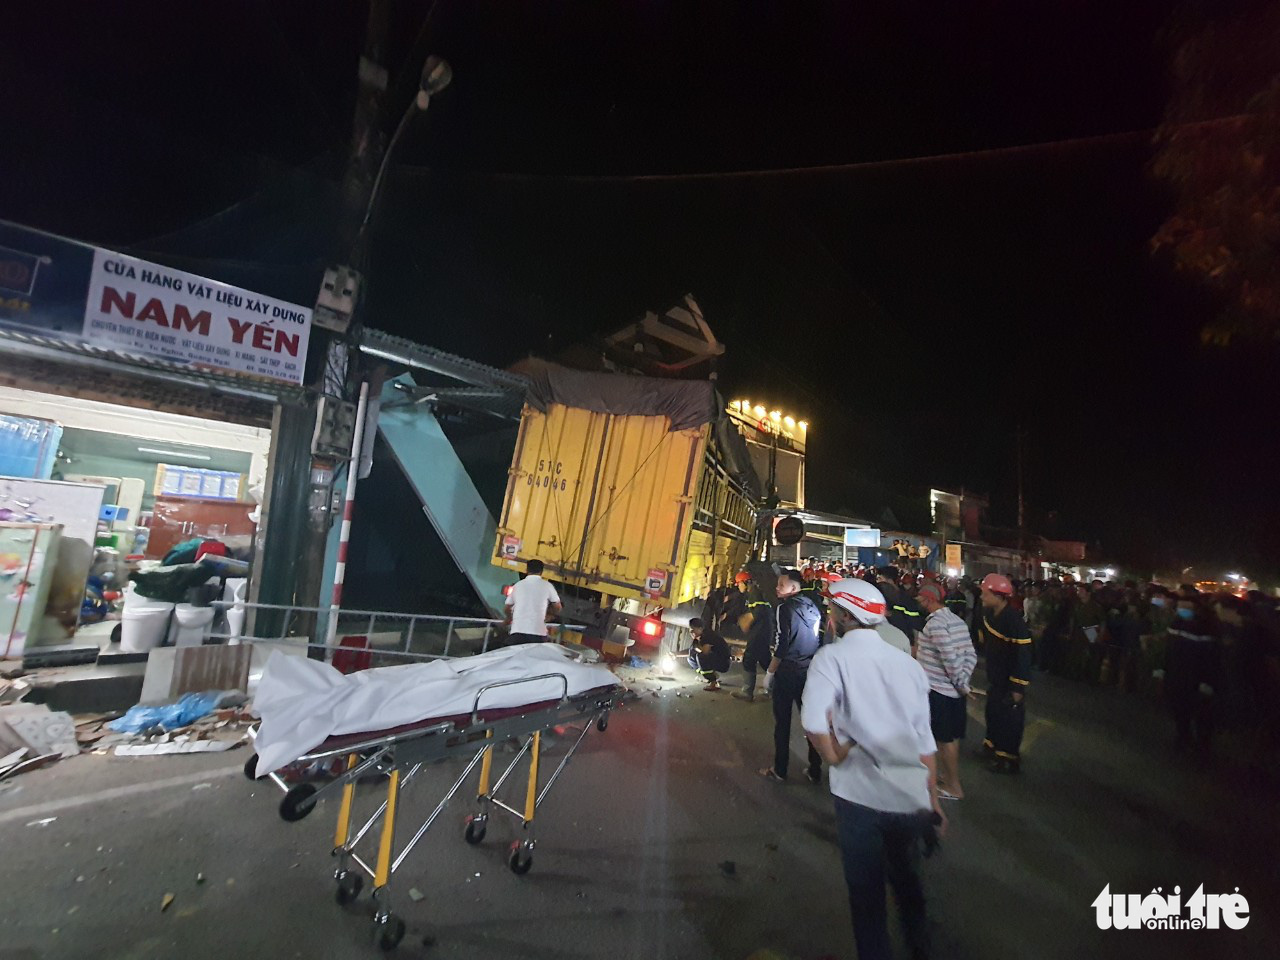 3 killed, 6 injured as truck crashes into car, motorbikes, houses in Vietnam